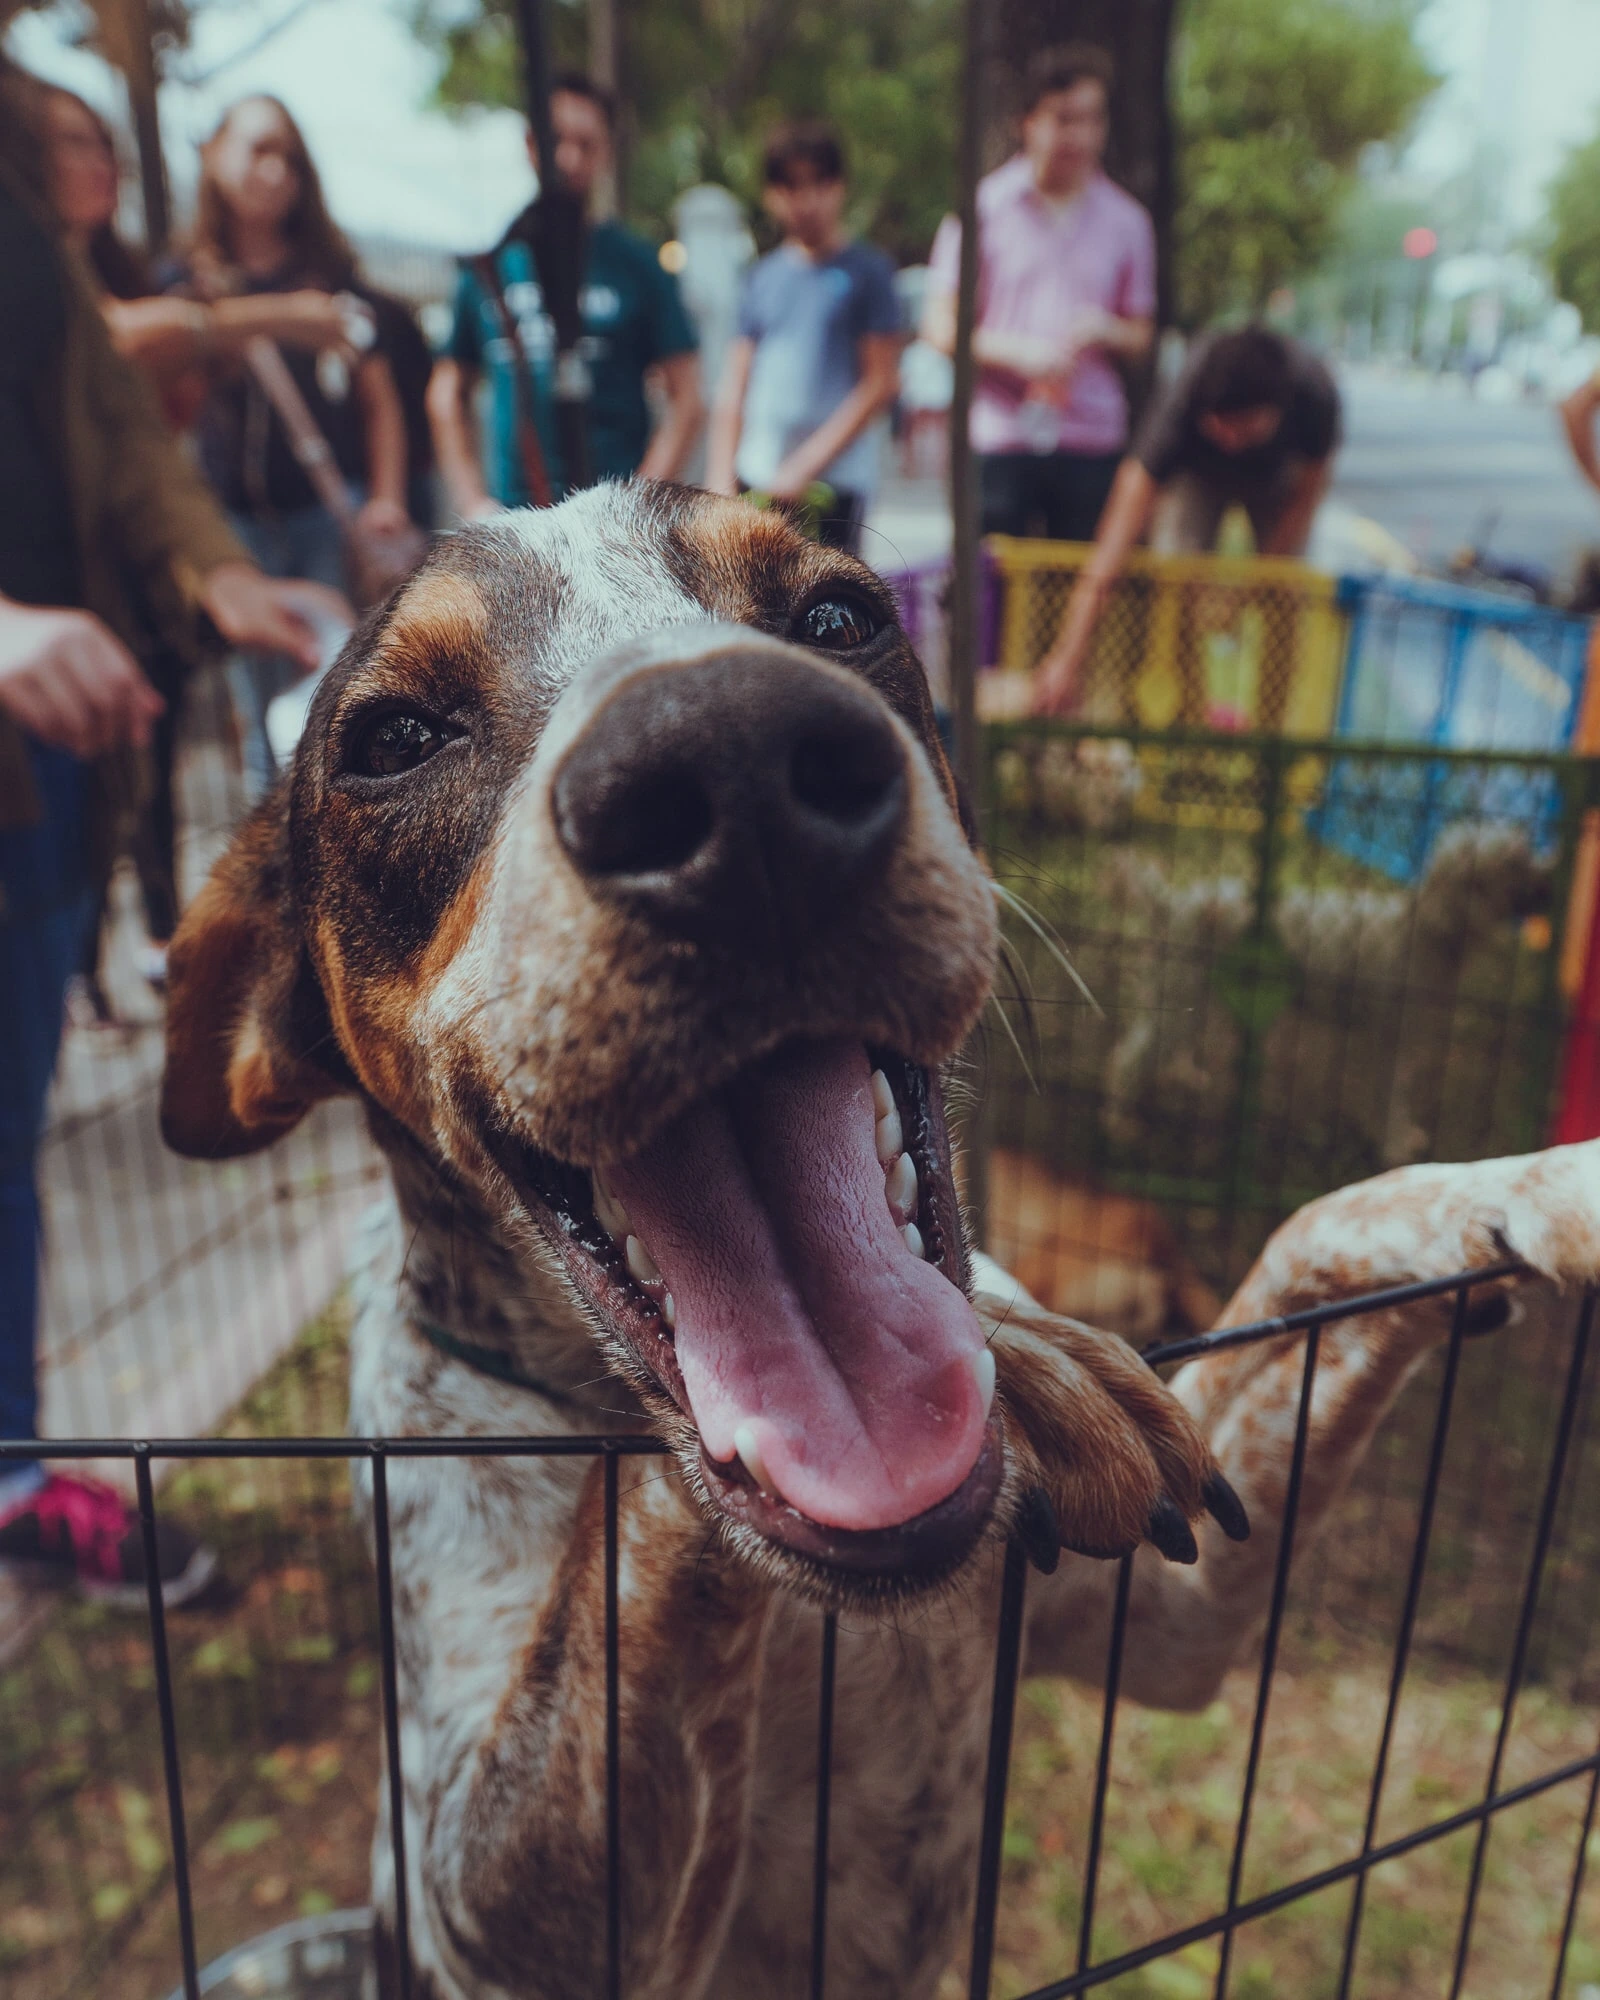 alonso-romero-beutiful hound dog in dog pen leaning on gate to greet potential owner unsplash